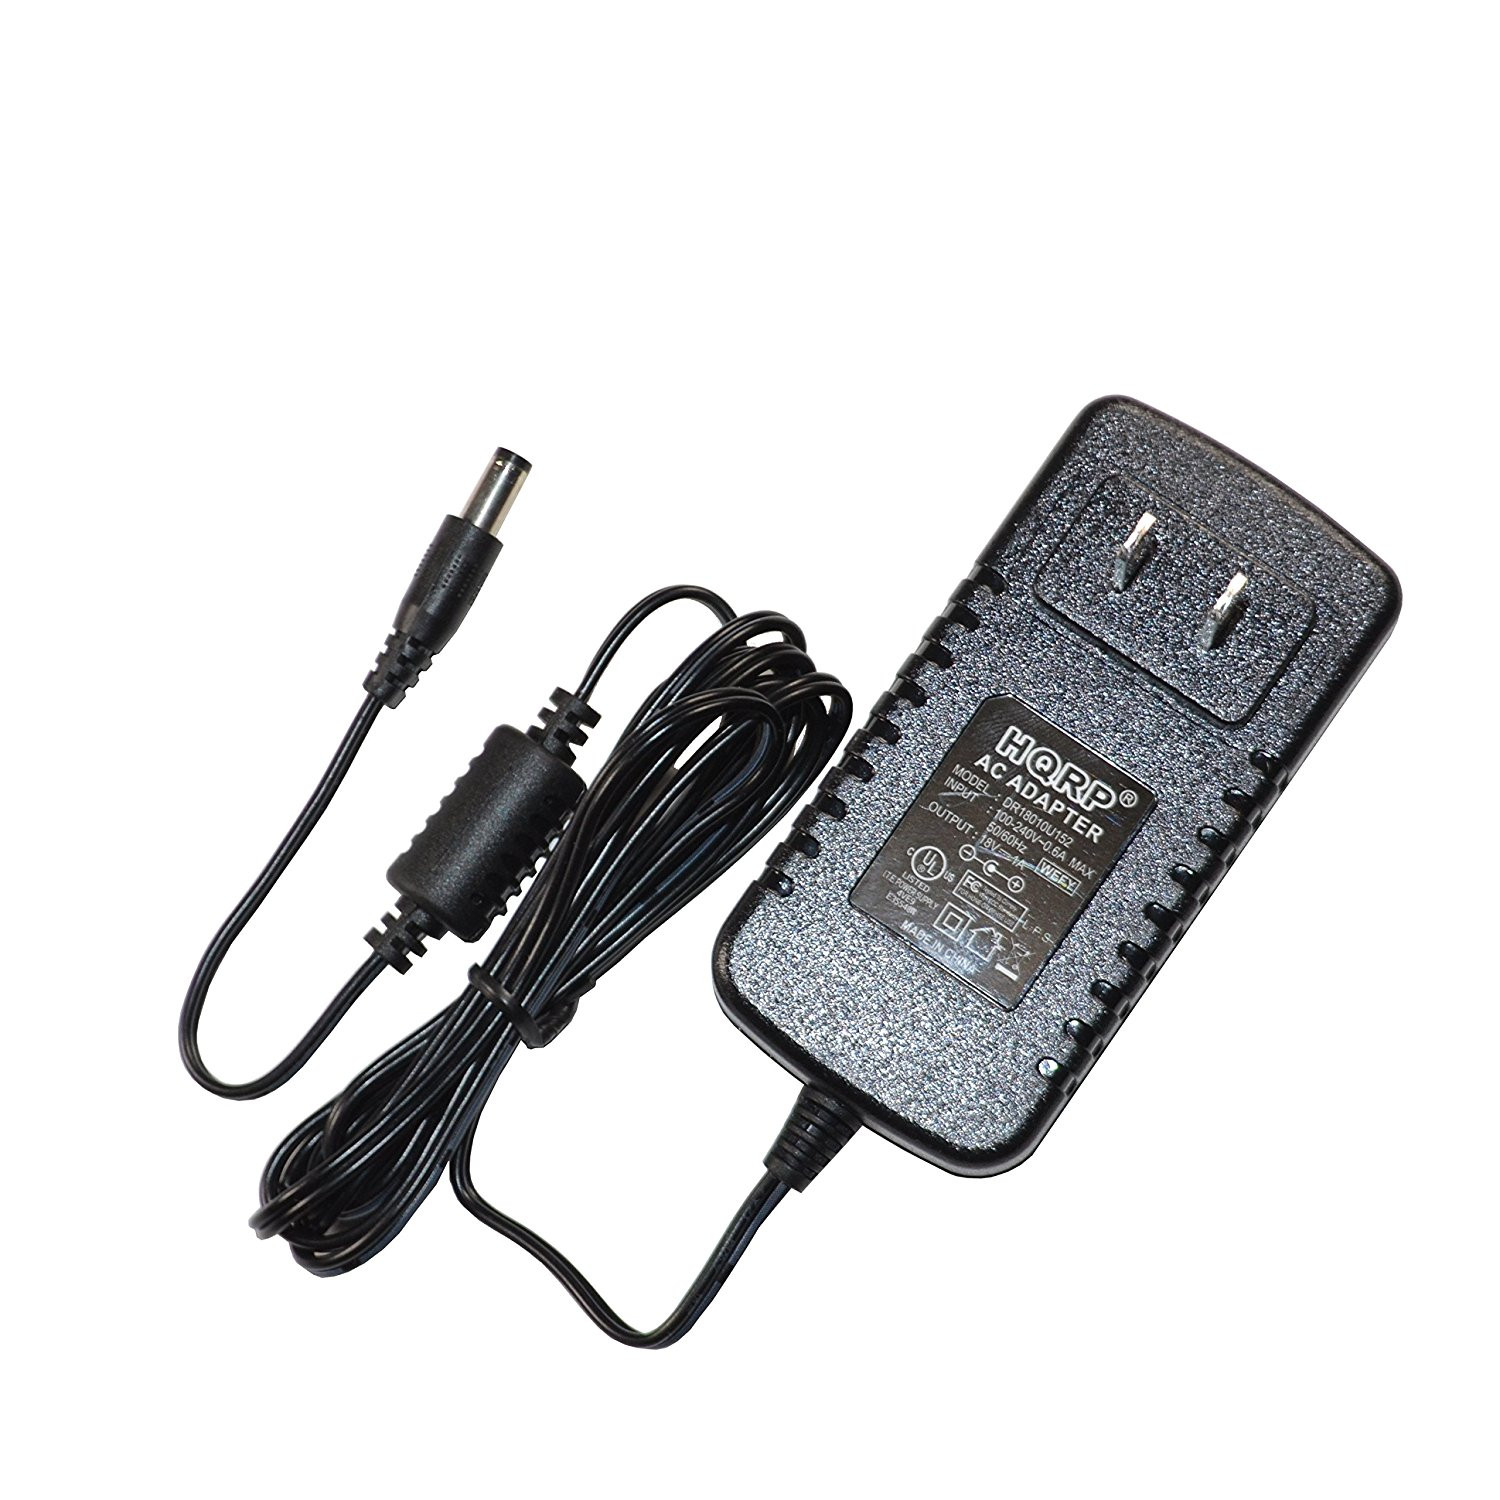 HQRP AC Adapter for Logitech Squeezebox Wi-Fi Internet Radio 993-000385 534-000245 PSAA18R-180 XR0001 930-000097 930-000101 UL Listed